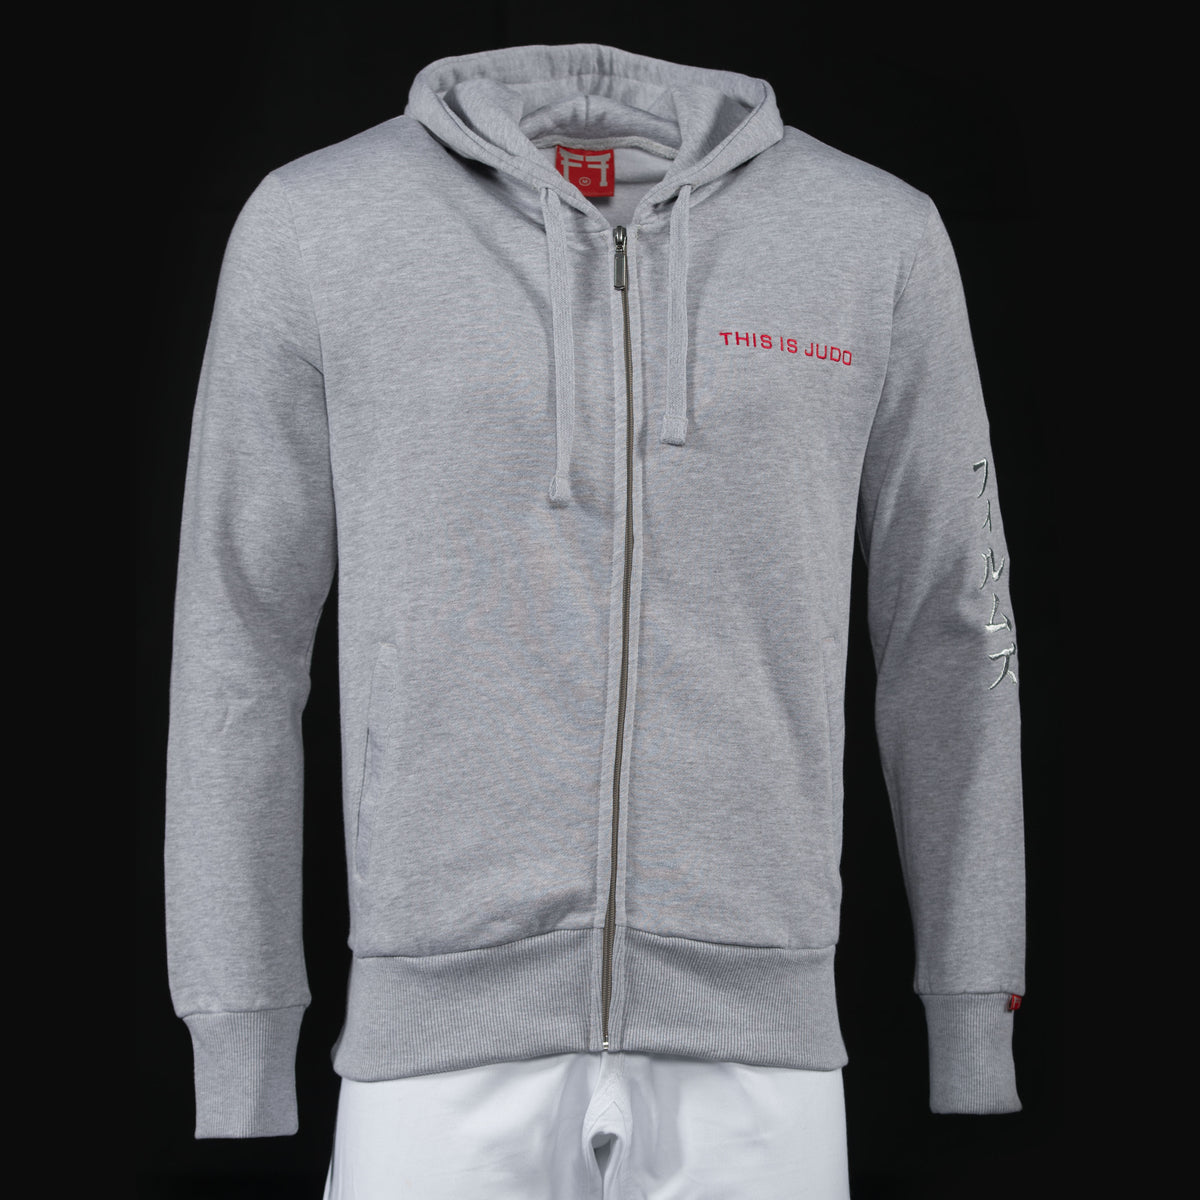 This Is Judo Embroidered Hoodie From Fighting Films